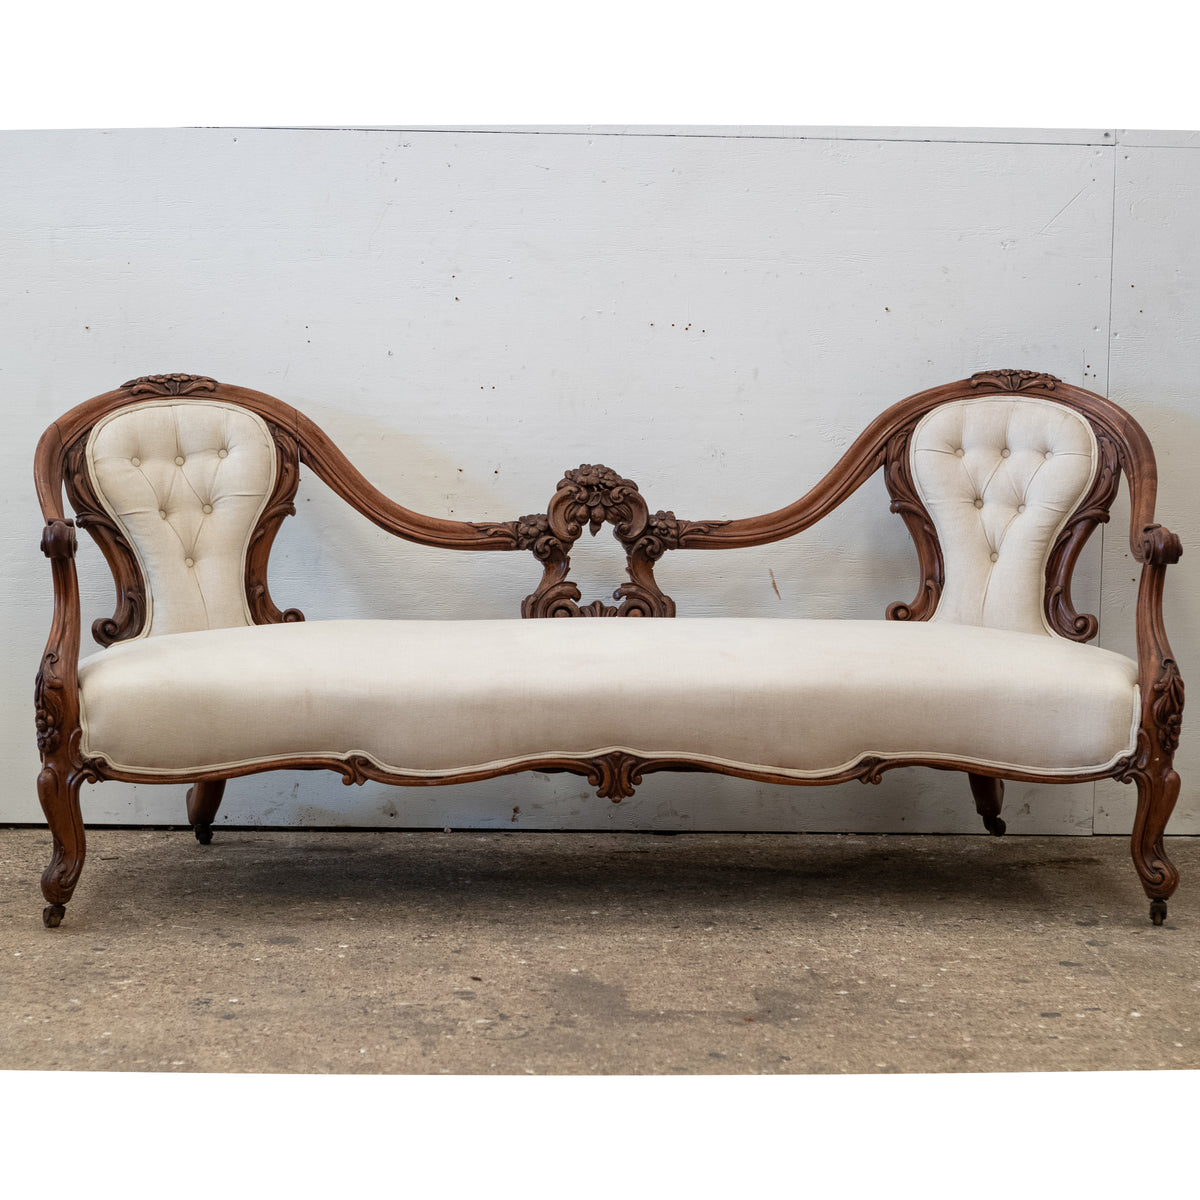 Antique Victorian Carved Mahogany Parlour Sofa | The Architectural Forum